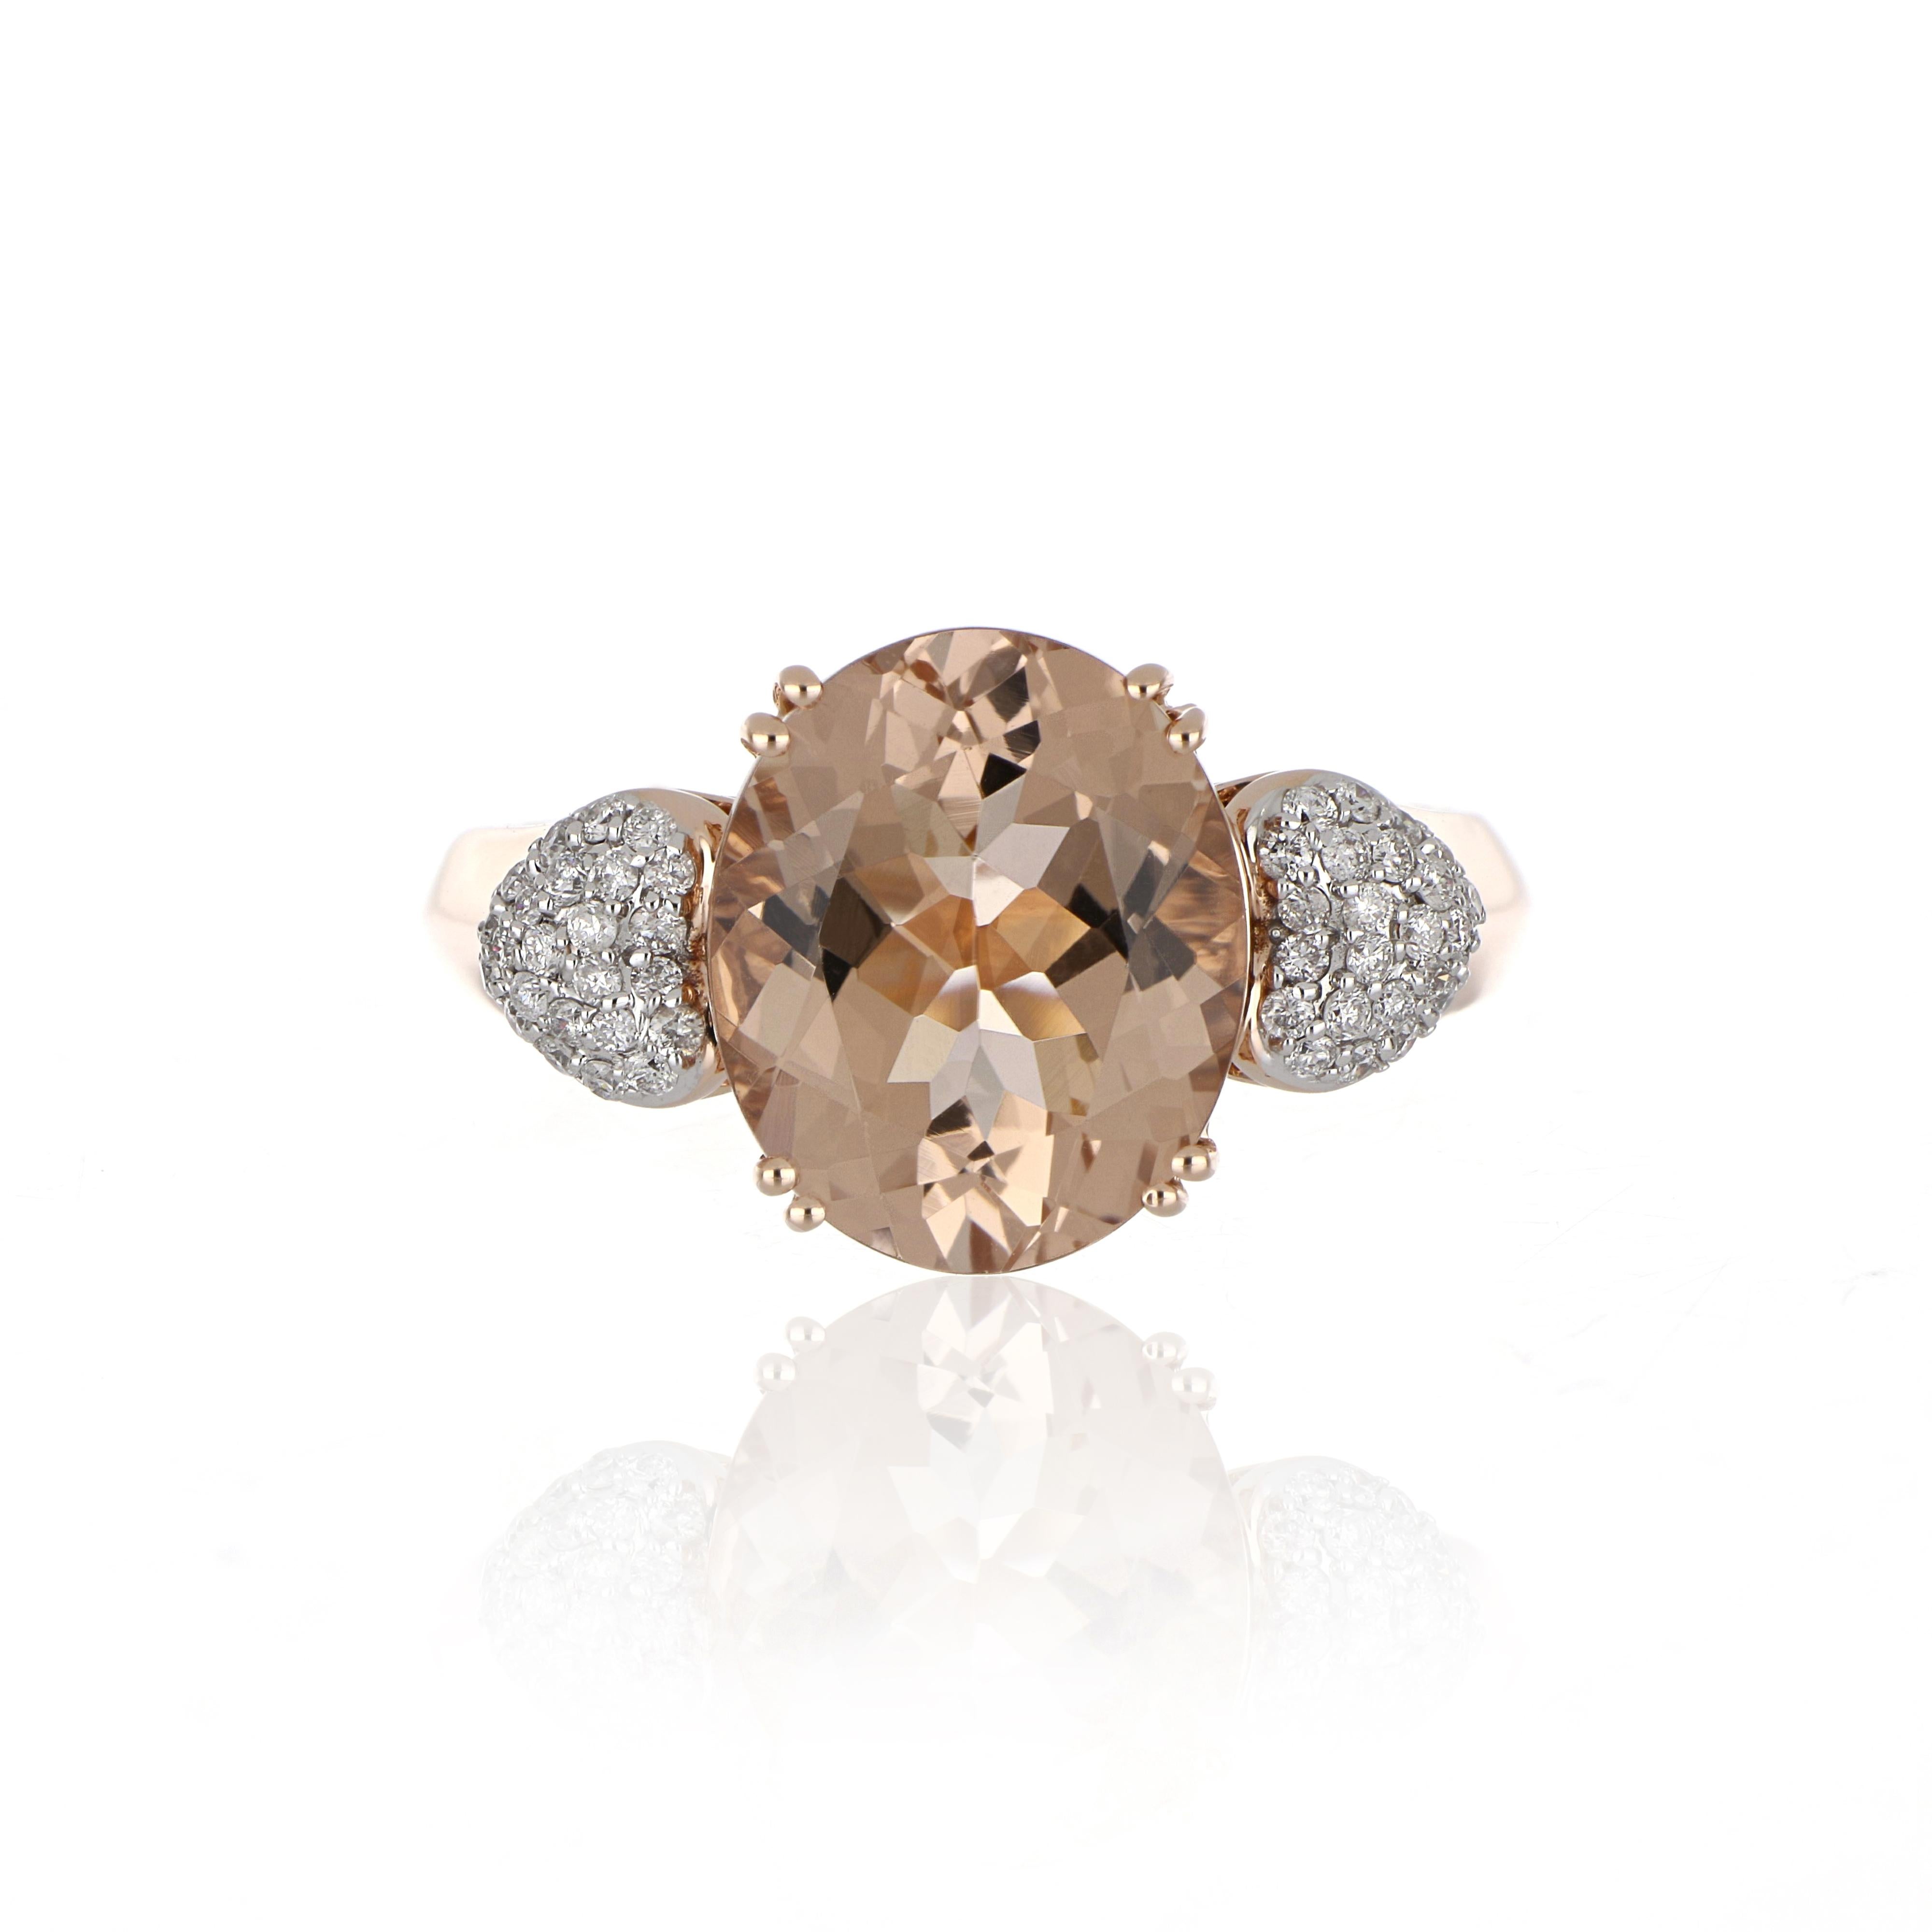 Elegant and exquisitely detailed Cocktail 14K Ring, centre set with 4.12 Ct Oval Morganite, accented with Diamonds on shoulders, weighing approx. 0.21 cts. total carat weight. Beautifully Hand crafted in 14 Karat Rose Gold.

Stone Size:
Morganite: